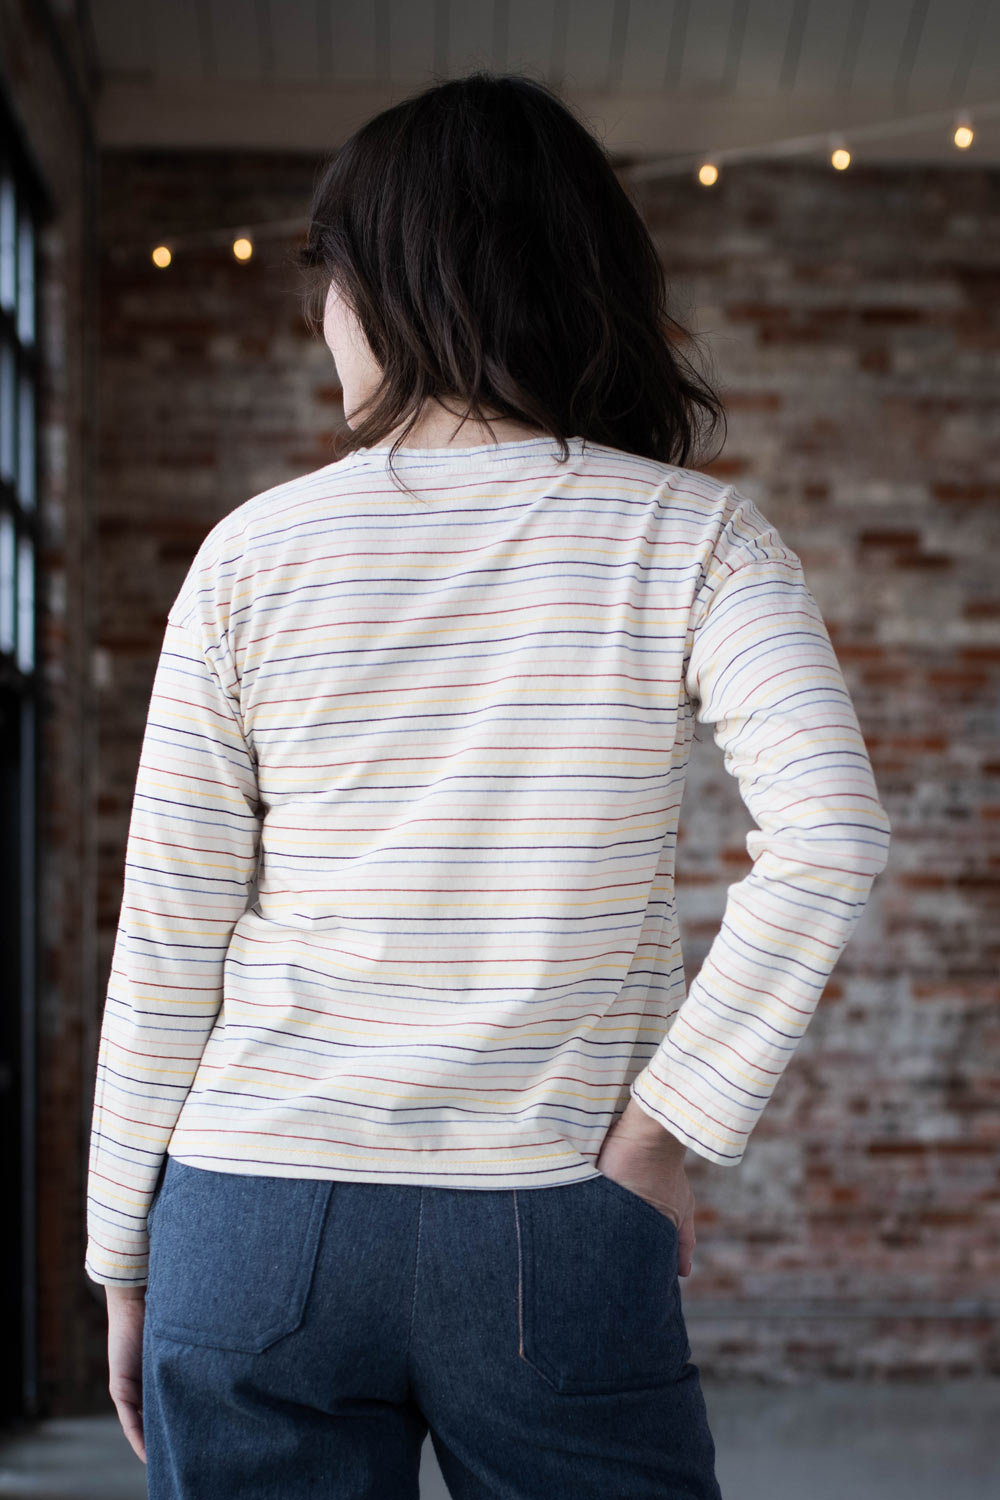 Meredith shows the back of her striped Bedrock Tee.